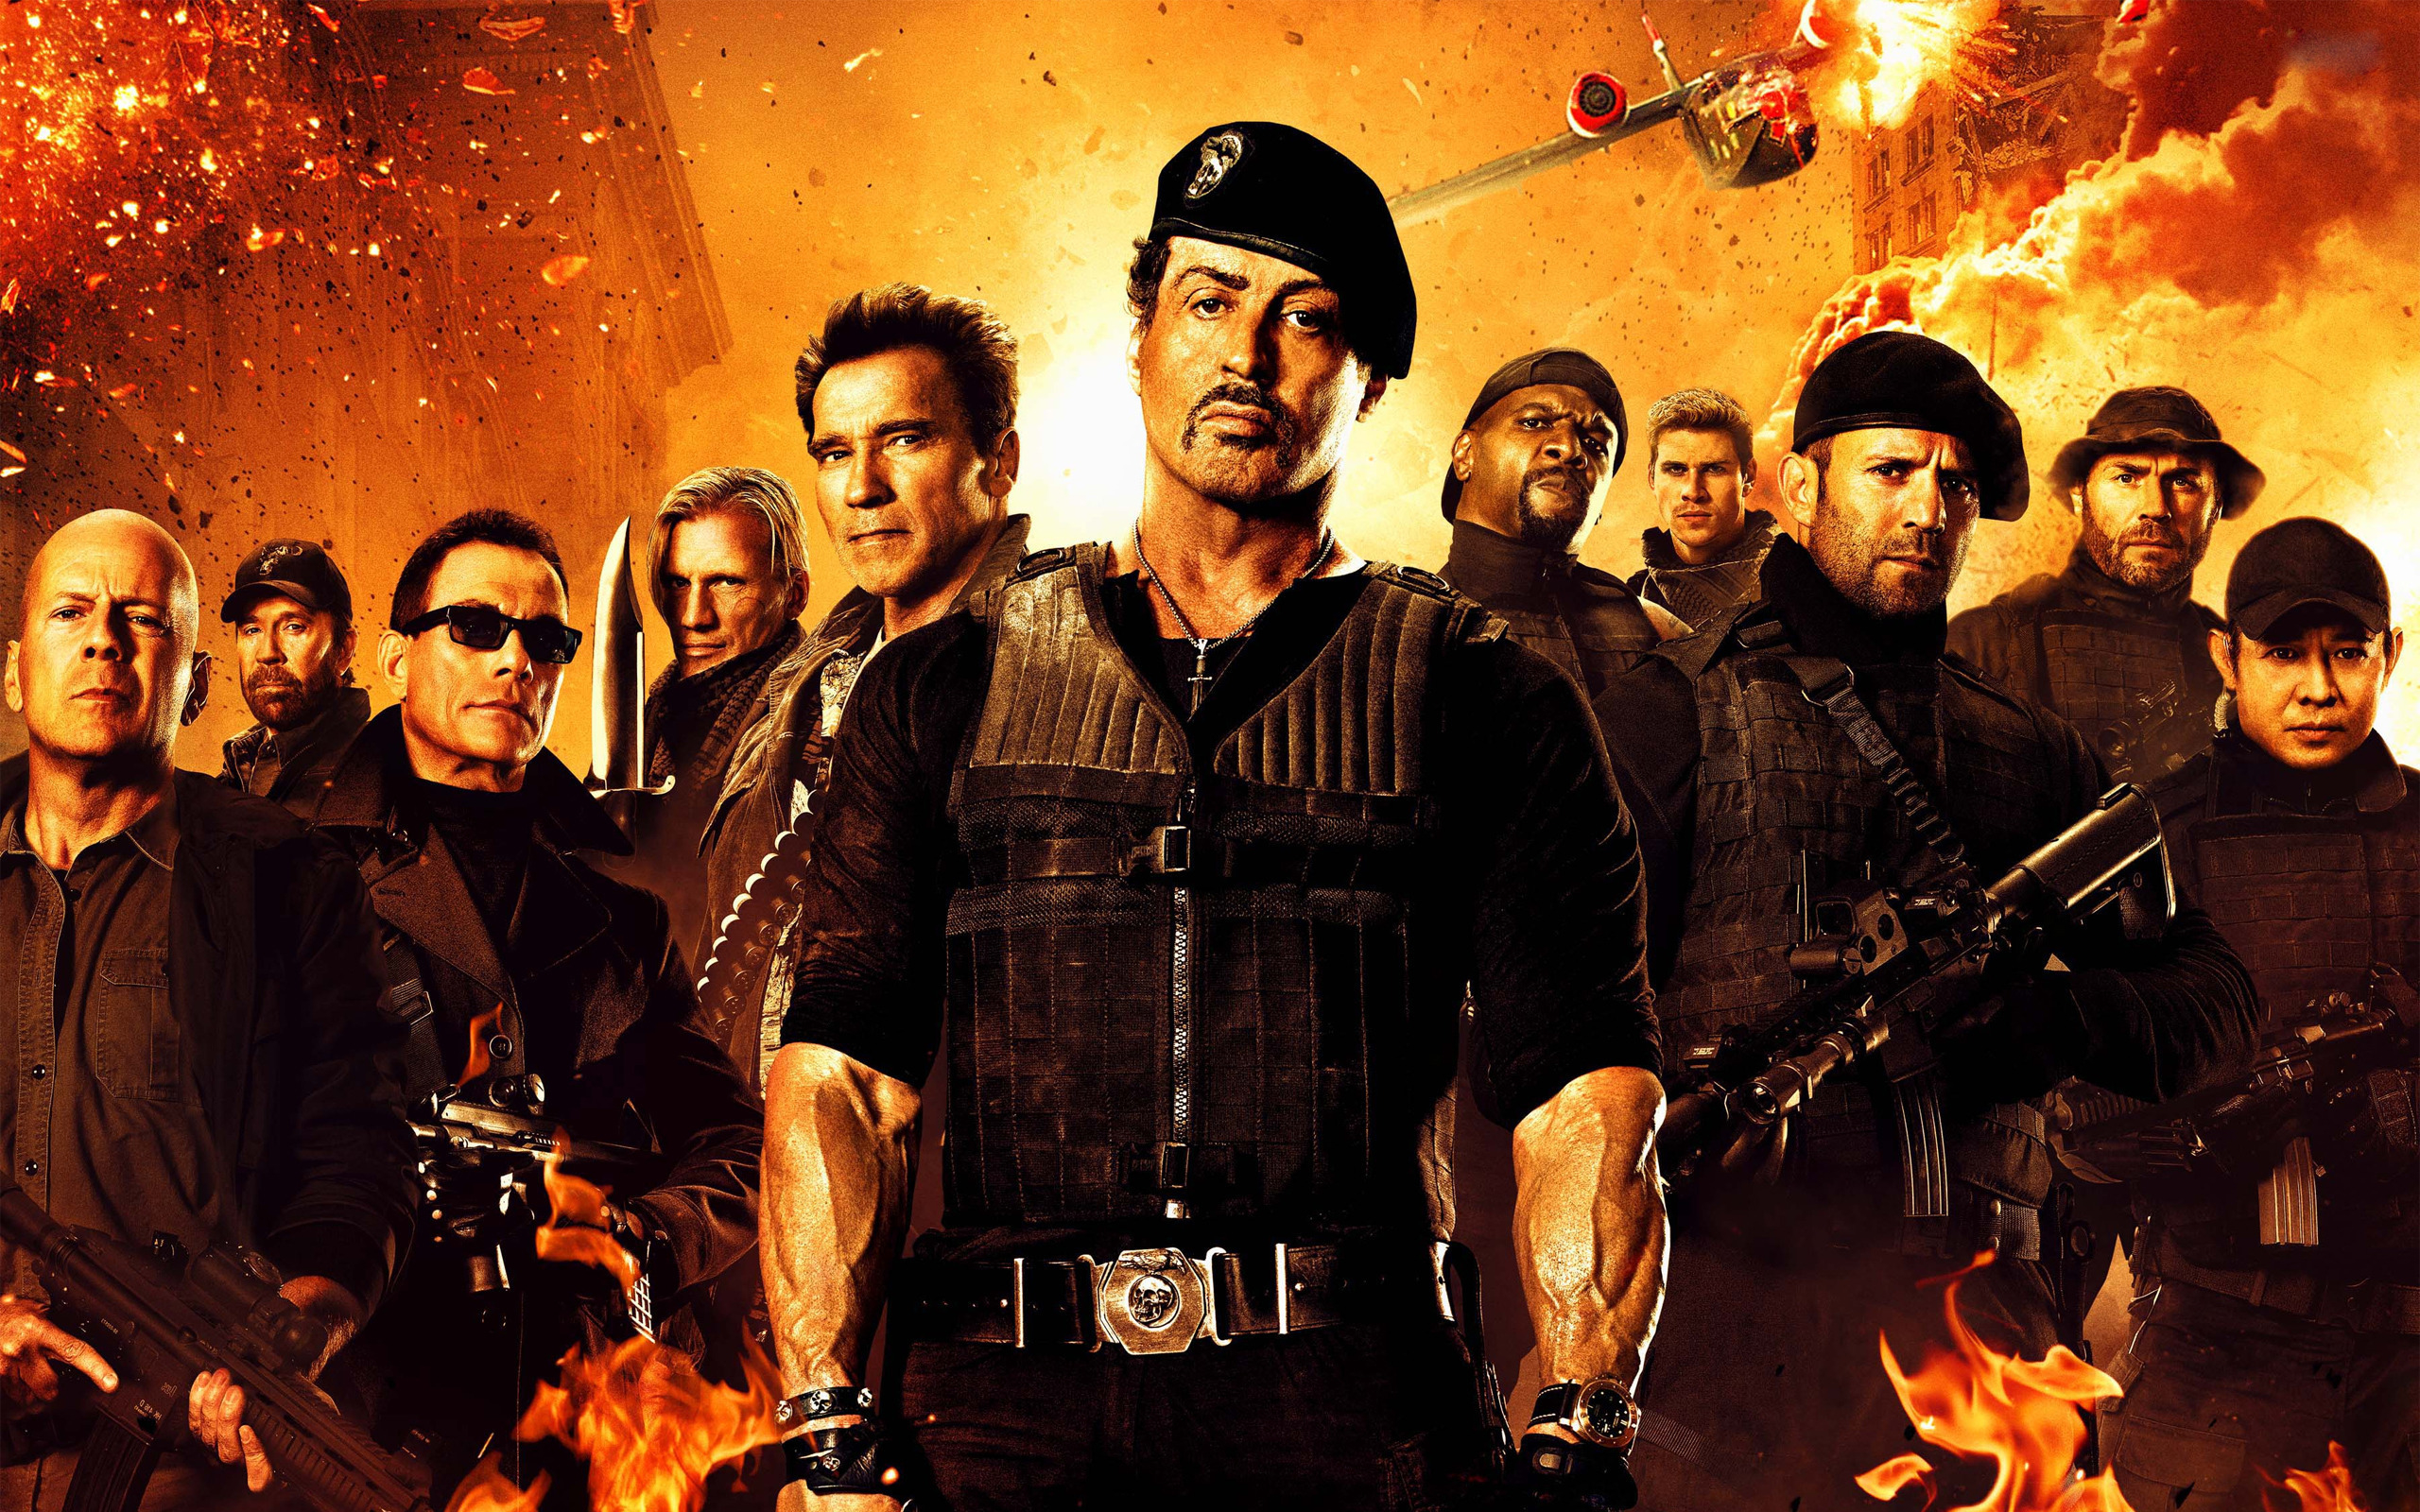 the expendables, movie, the expendables 2, arnold schwarzenegger, barney ross, billy (the expendables), booker (the expendables), bruce willis, chuck norris, church (the expendables), dolph lundgren, gunnar jensen, hale caesar, jason statham, jean claude van damme, jet li, lee christmas, liam hemsworth, randy couture, sylvester stallone, terry crews, toll road, trench (the expendables), vilain (the expendables), yin yang (the expendables) HD wallpaper